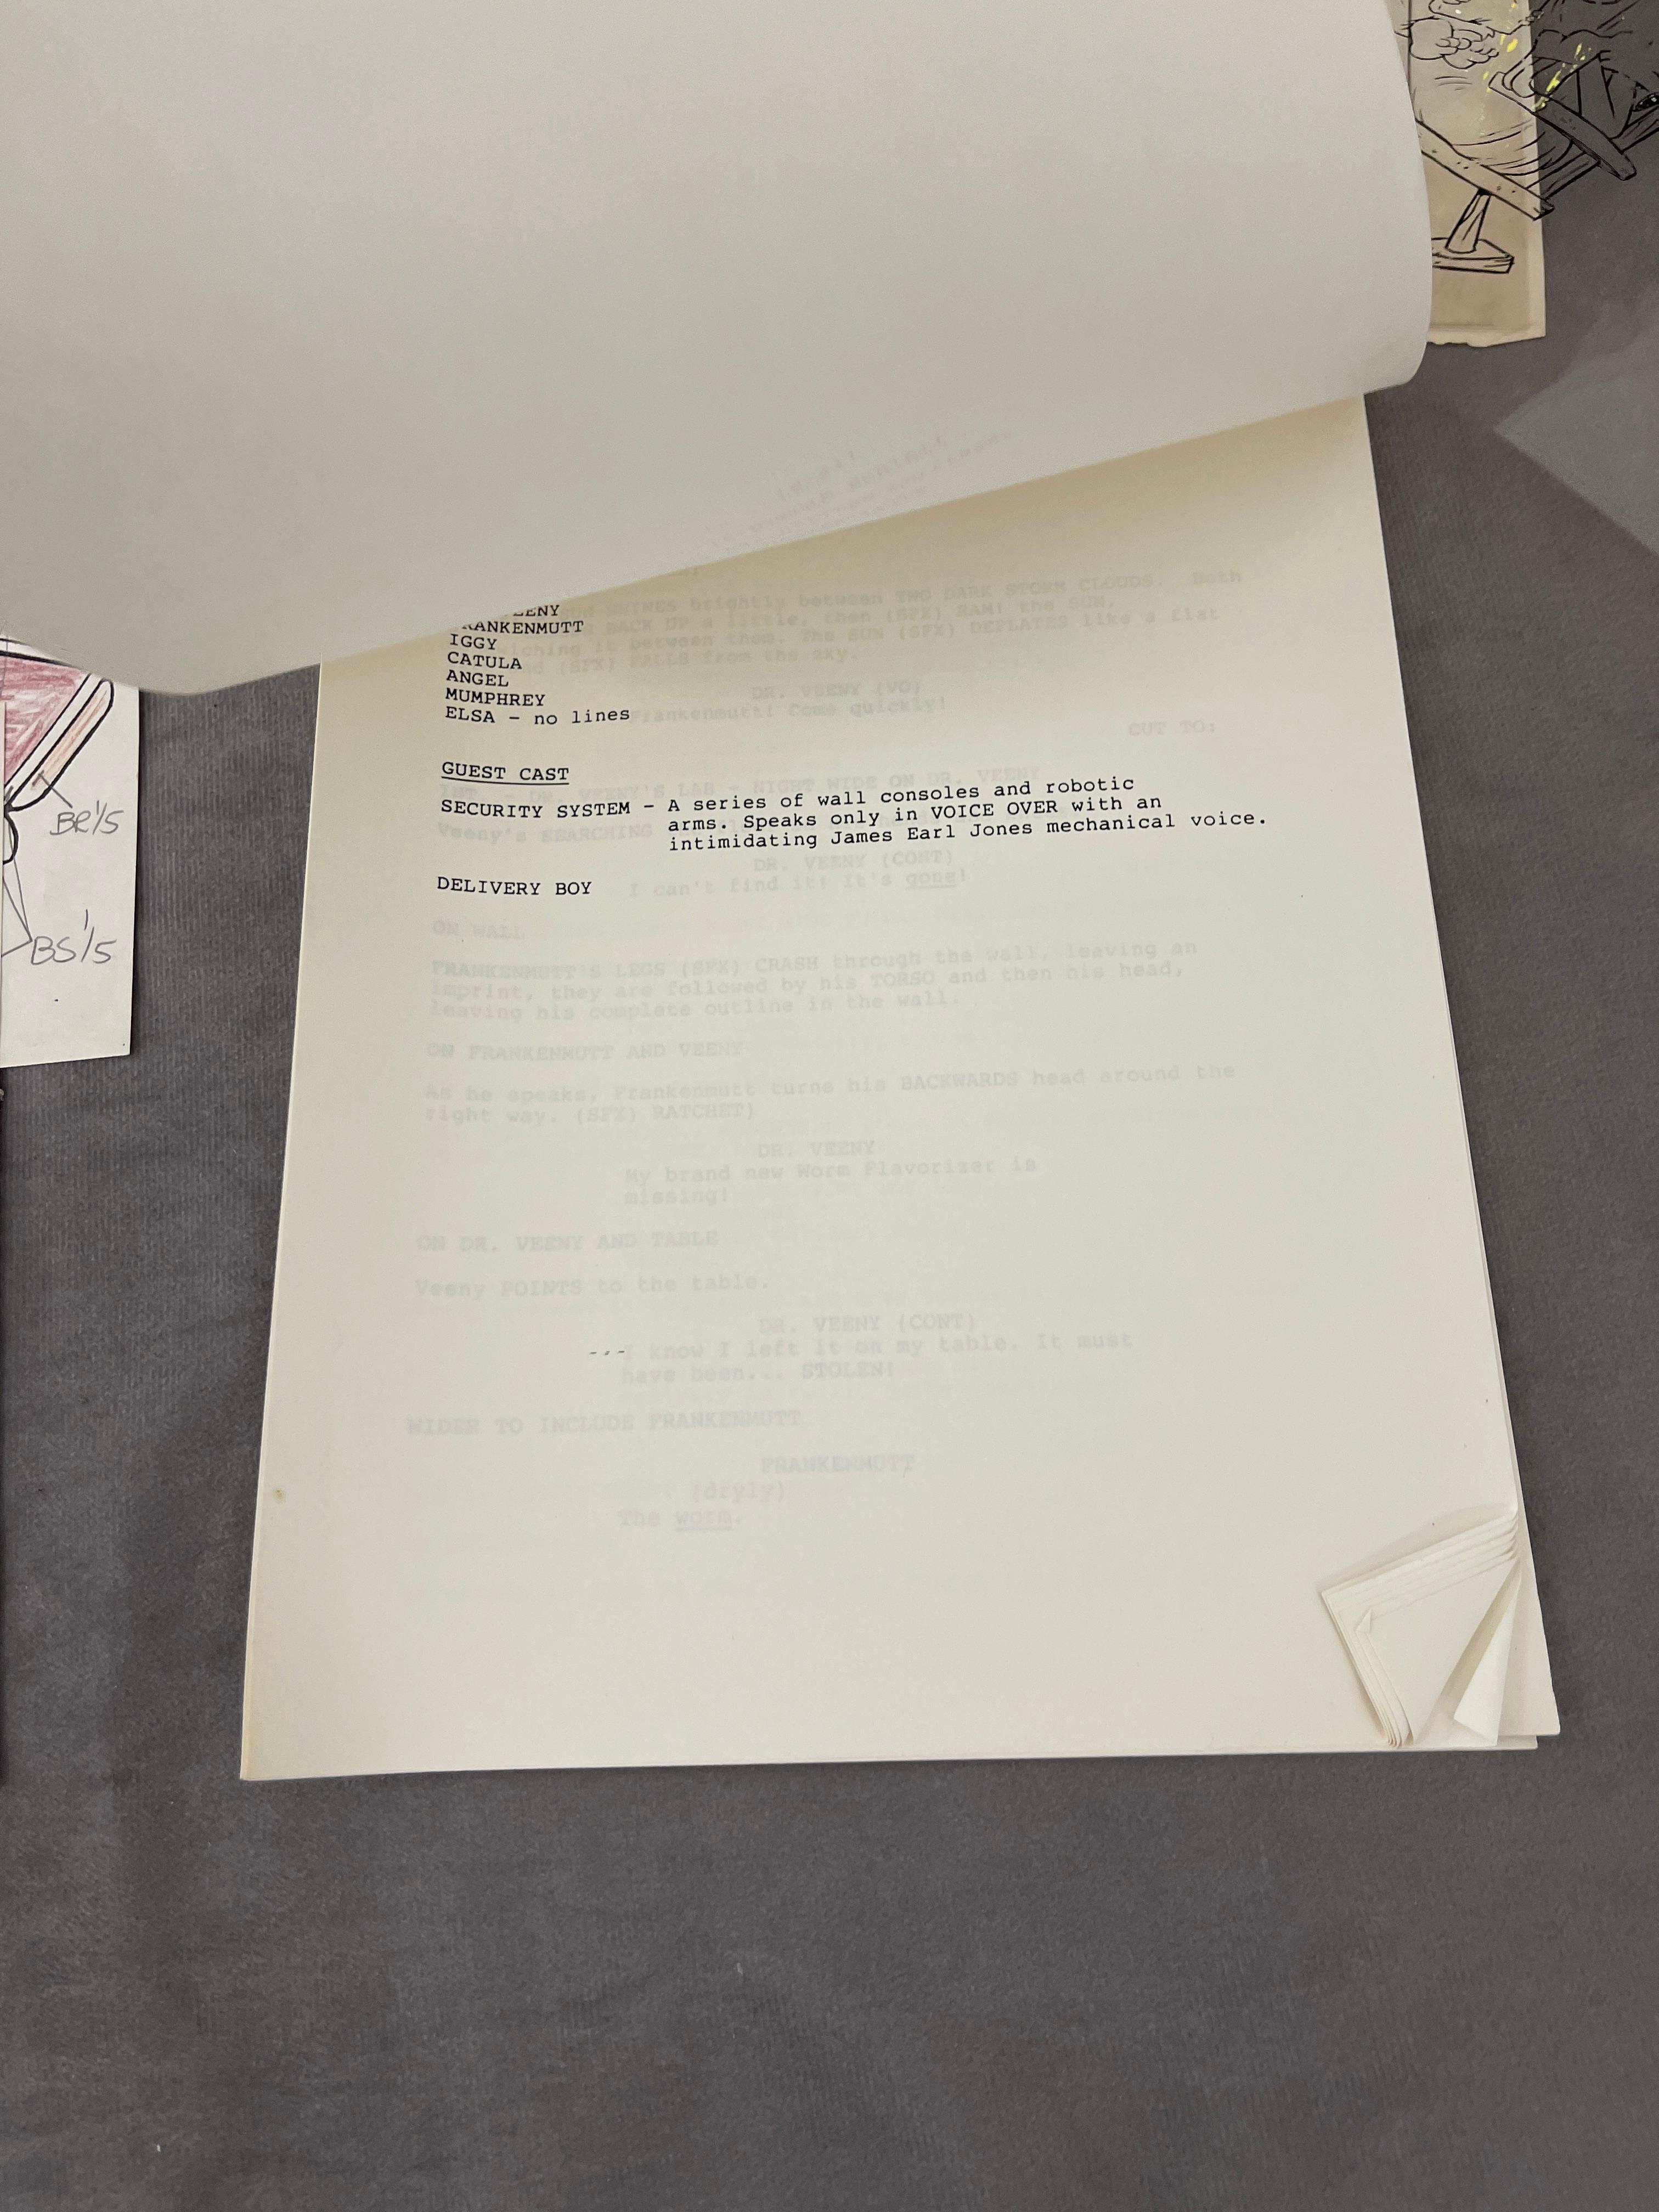 Hanna Barbera Animation Papers and Scripts from Multiple Shows